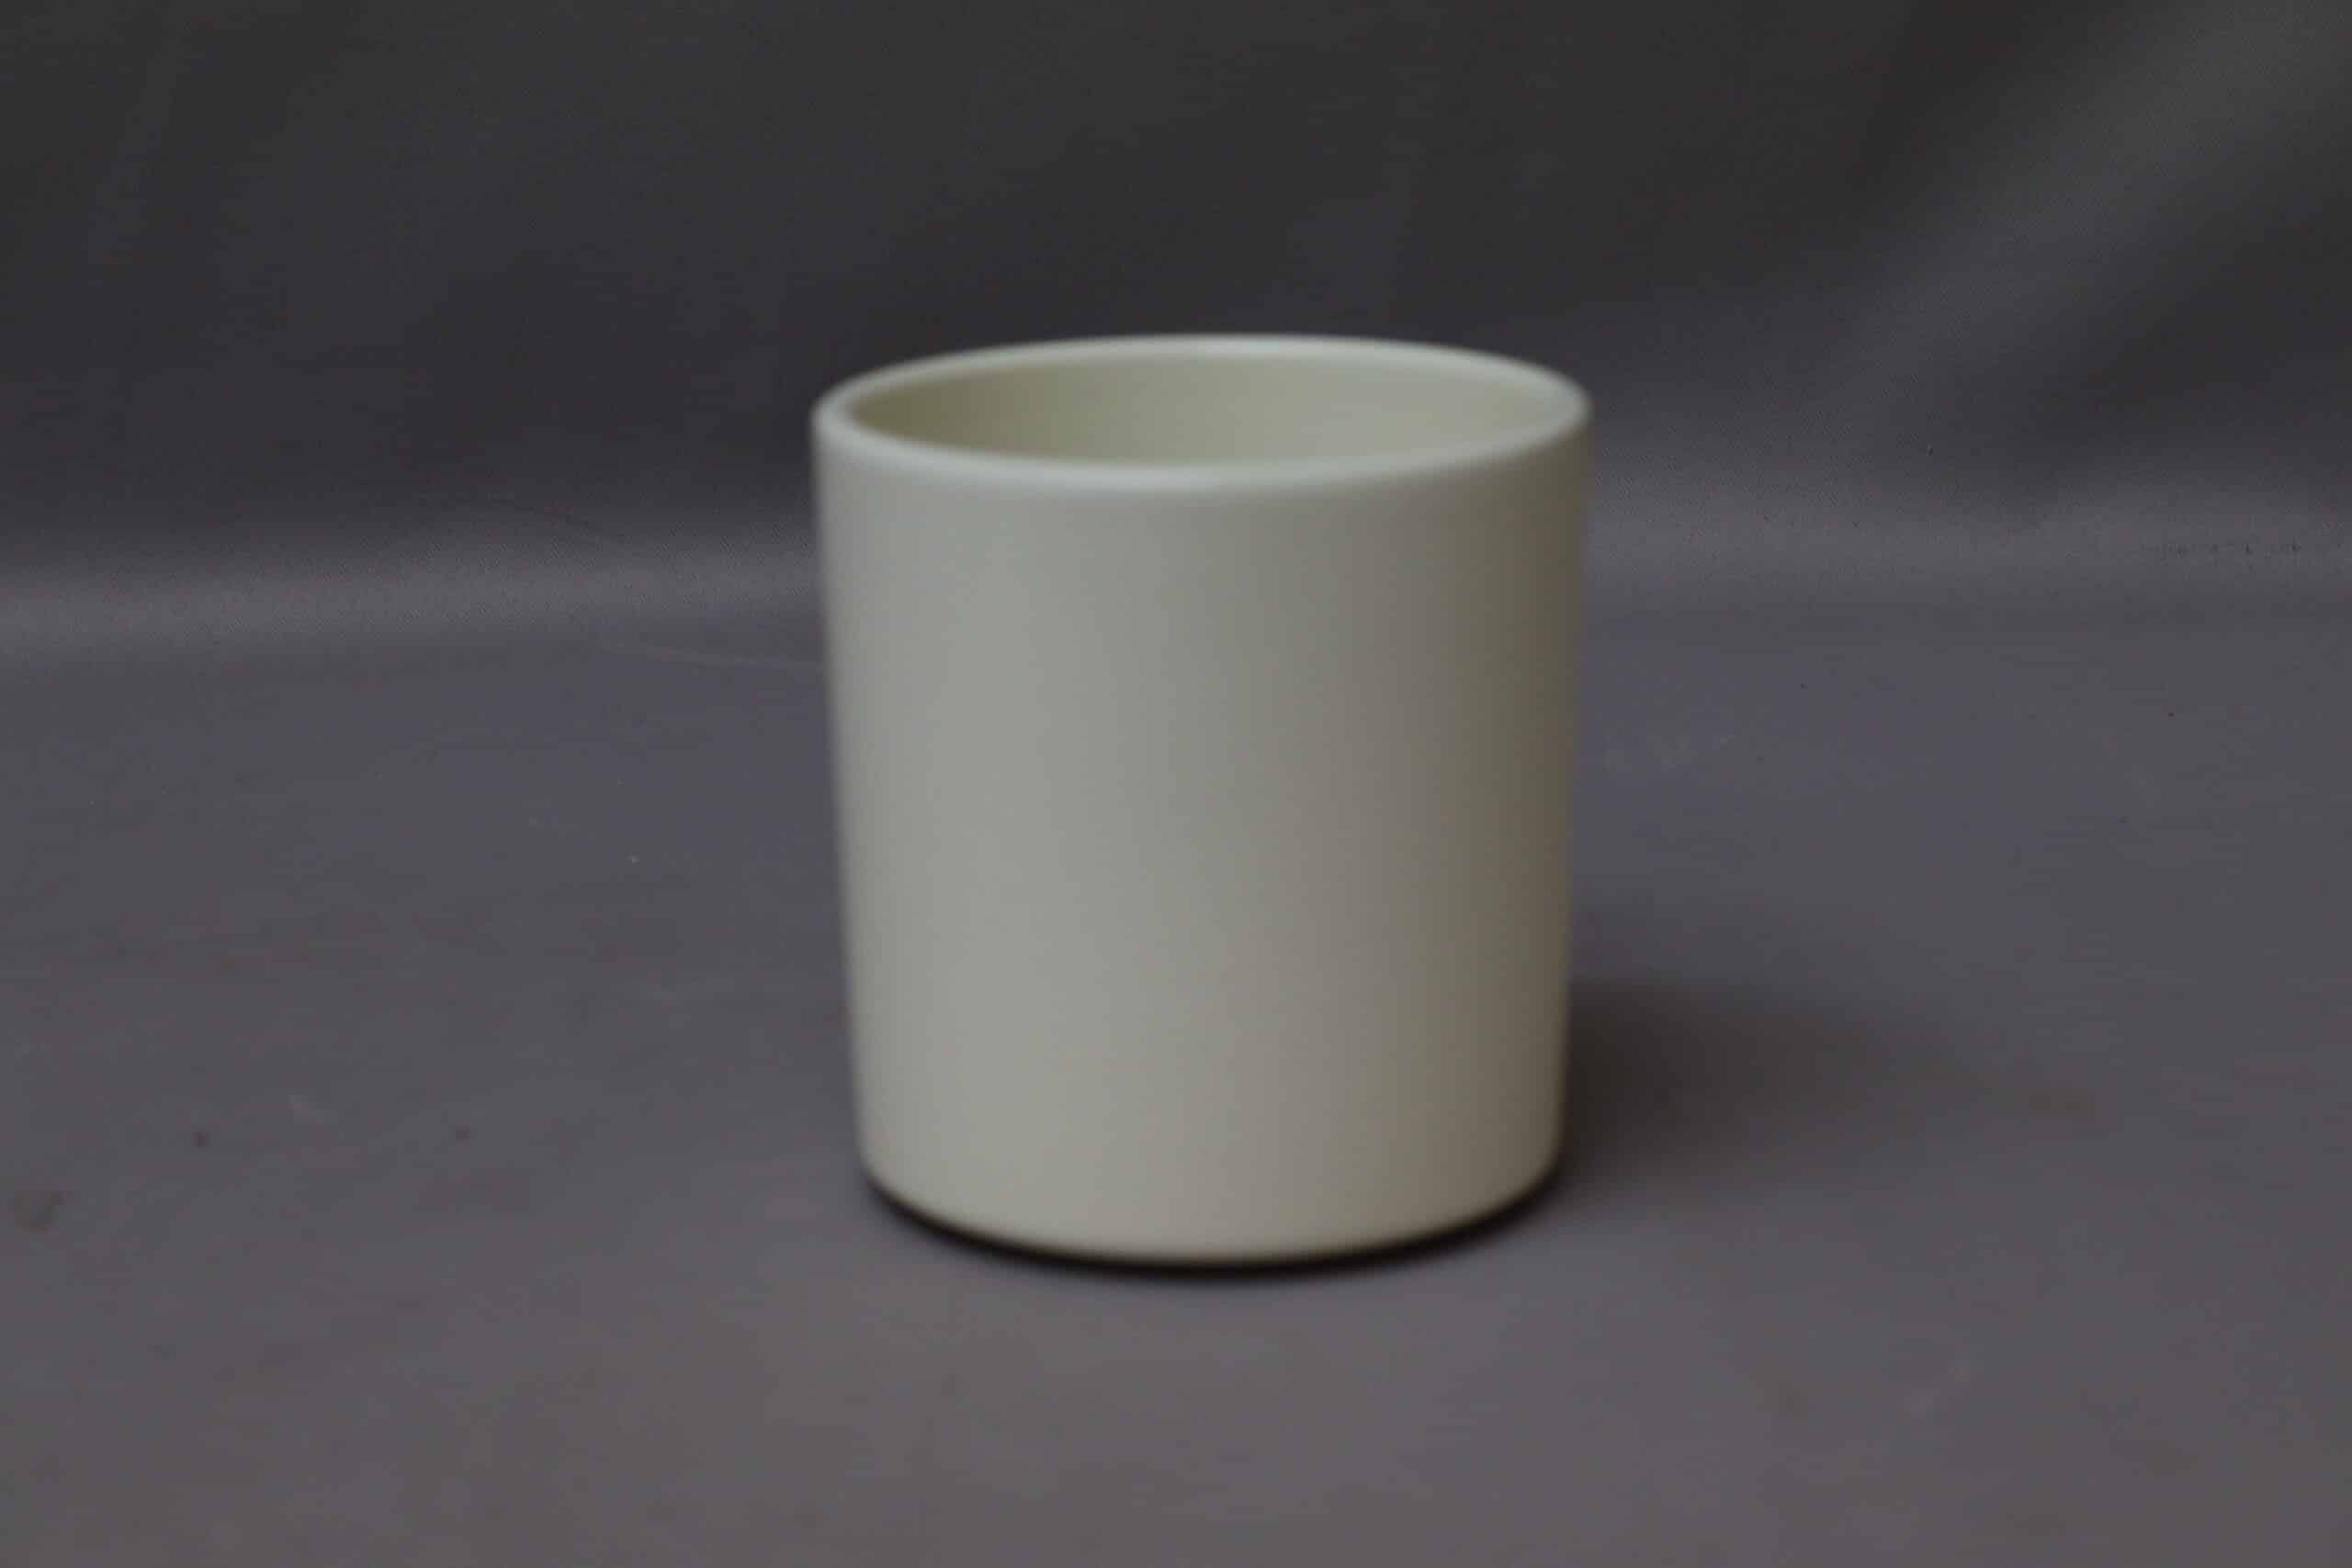 Smooth beige rounded pot cover for potted plants.